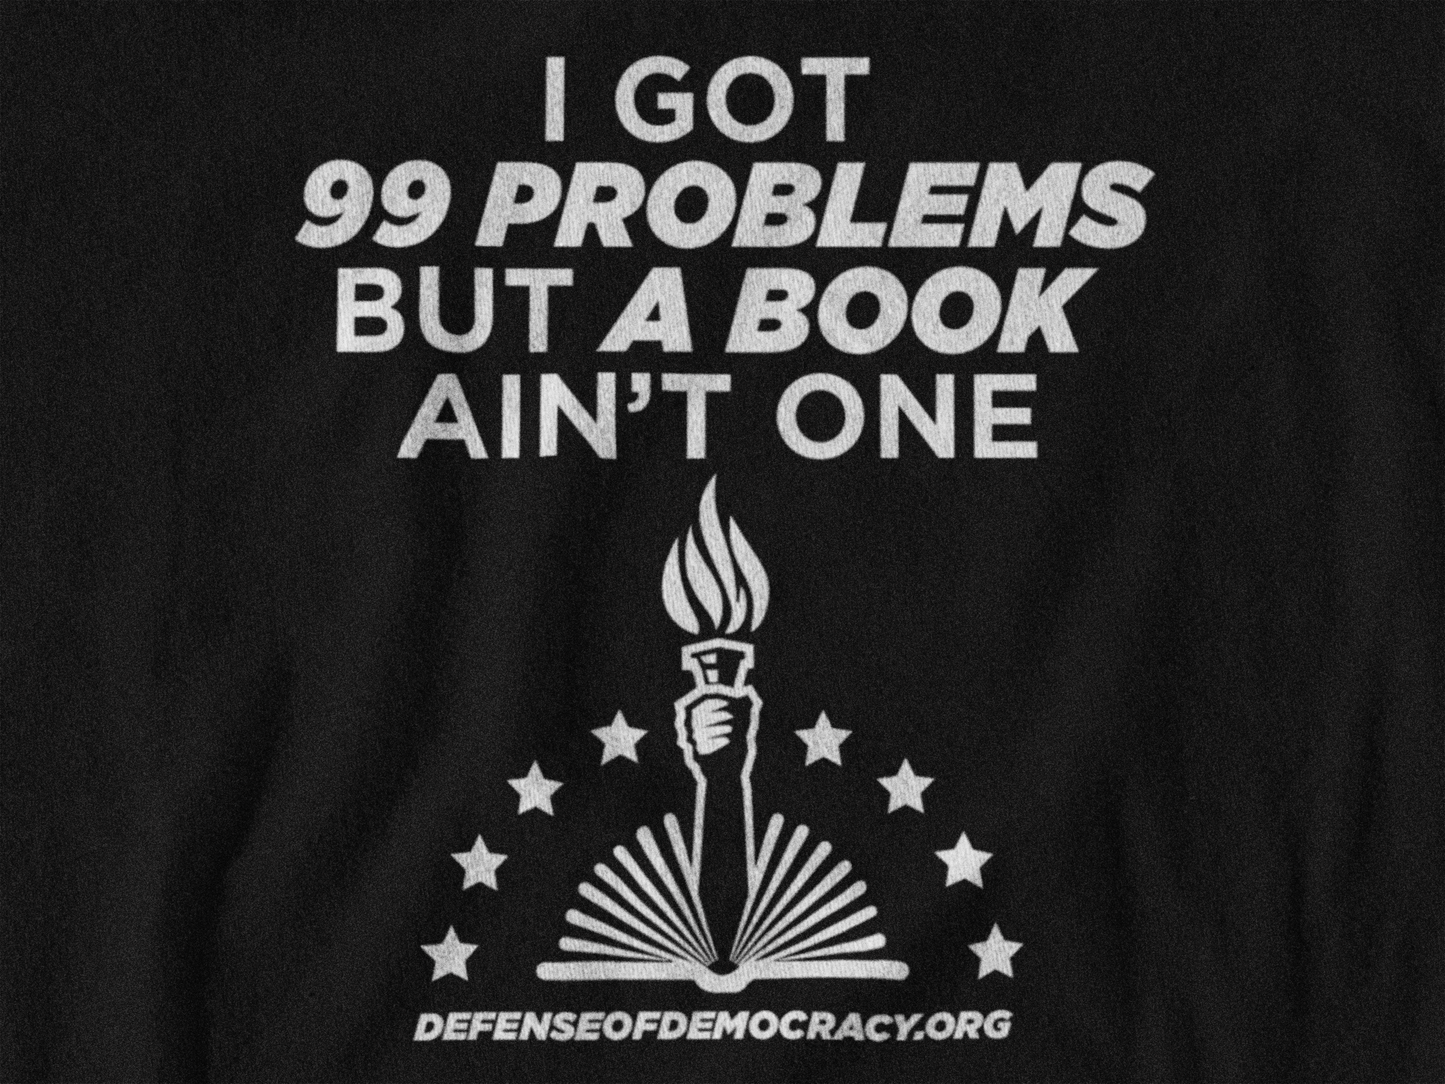 99 Problems but a Book Ain't One - Defense of Democracy T-shirt: Unisex, Ladies V-neck or Longsleeve